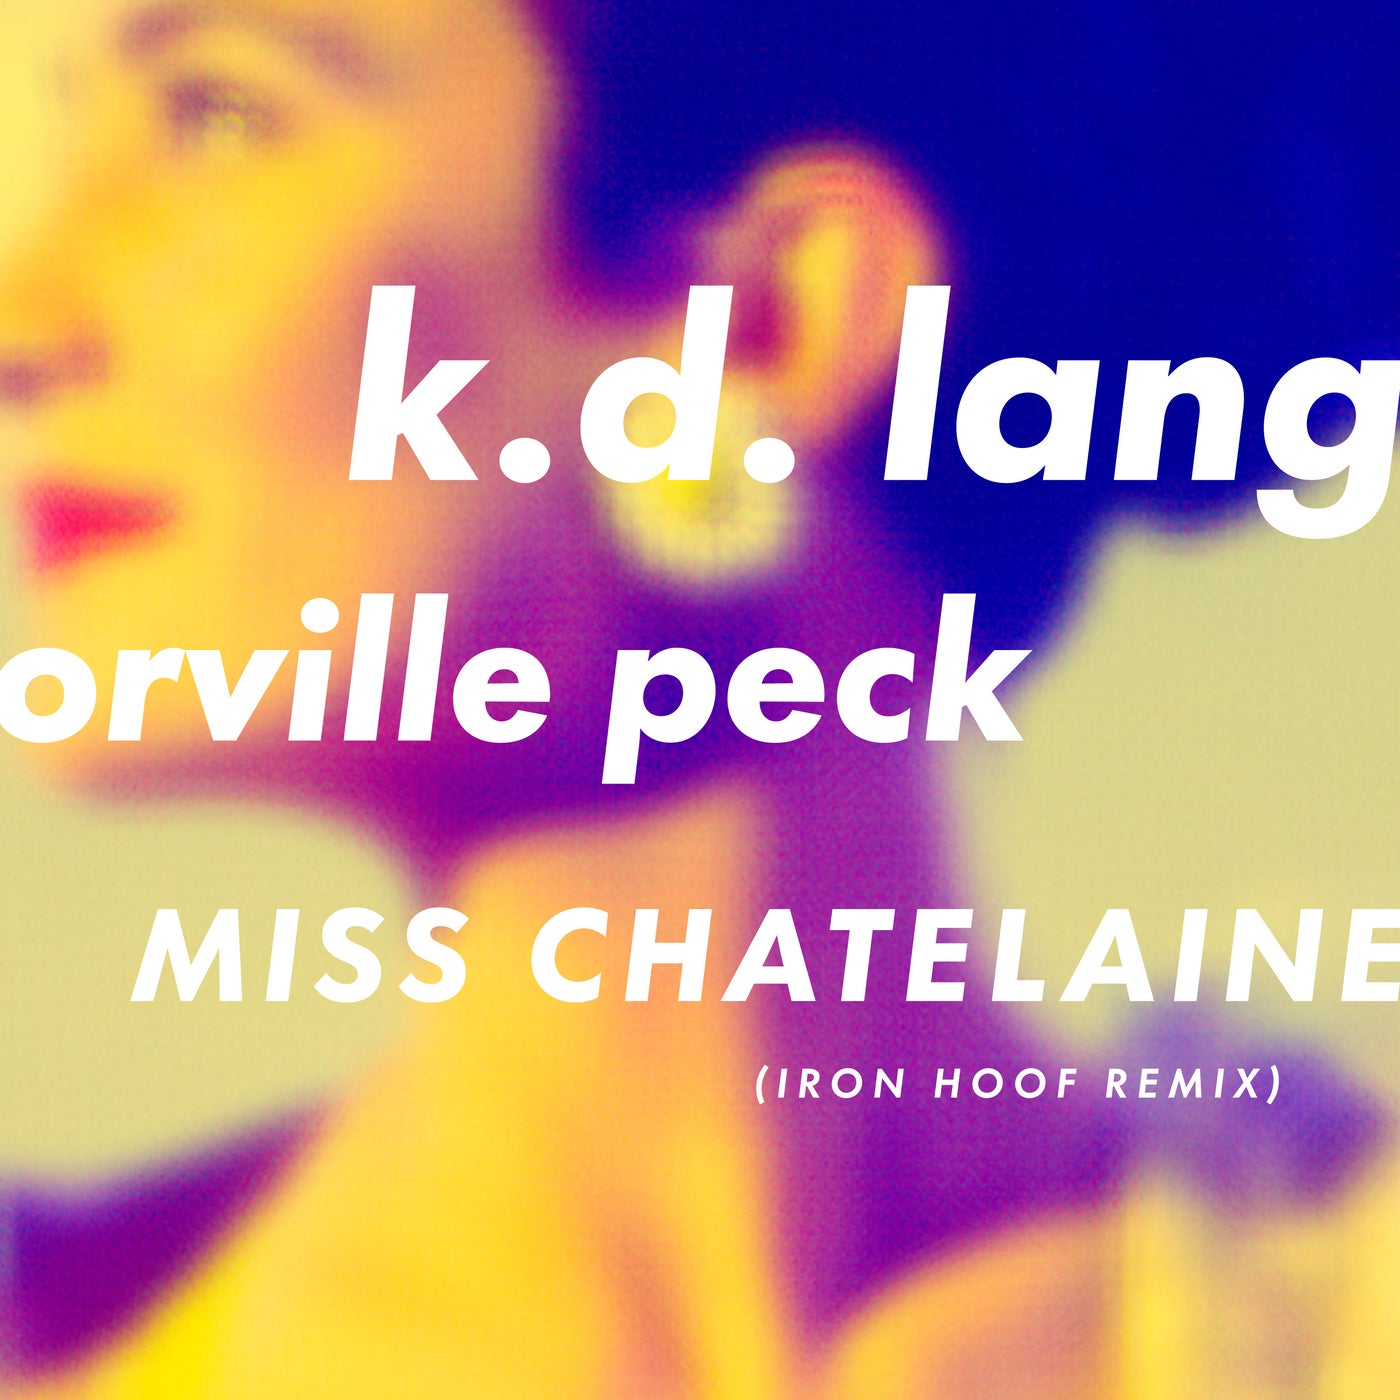 Miss Chatelaine (St. Tropez Mix) by k.d. lang on Beatsource